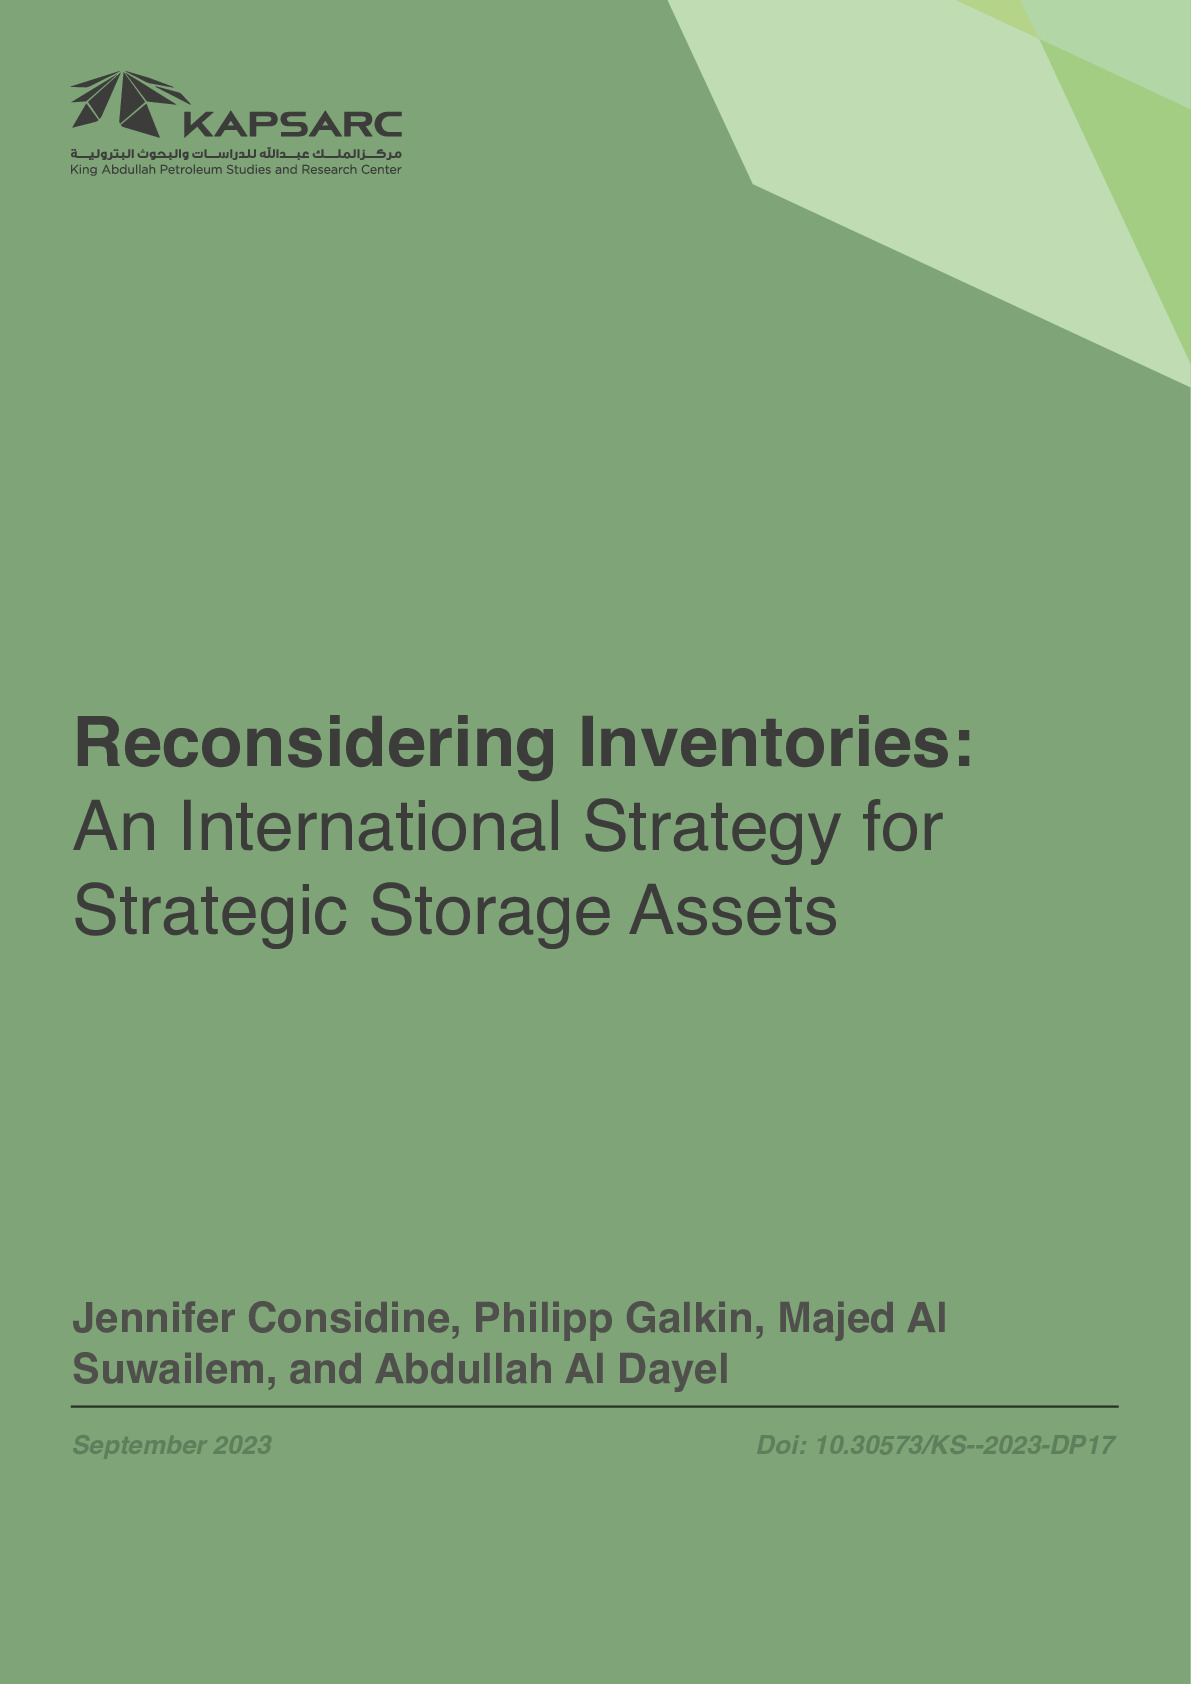 Reconsidering Inventories: An International Strategy for Strategic Storage Assets